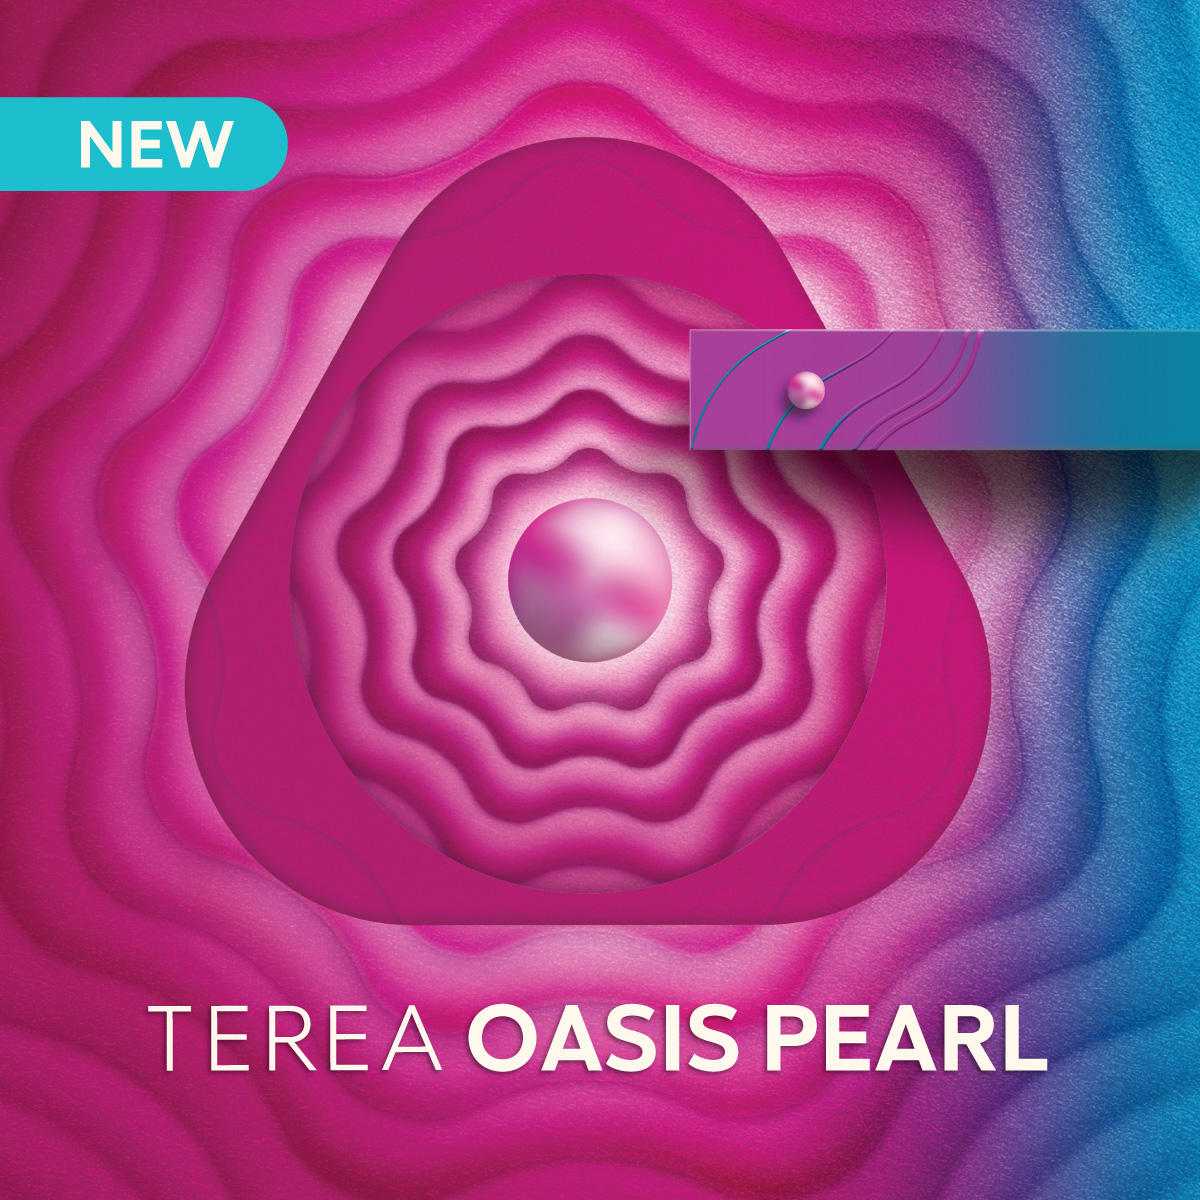 ready to boost your flavor with Terea Oasis Pearl